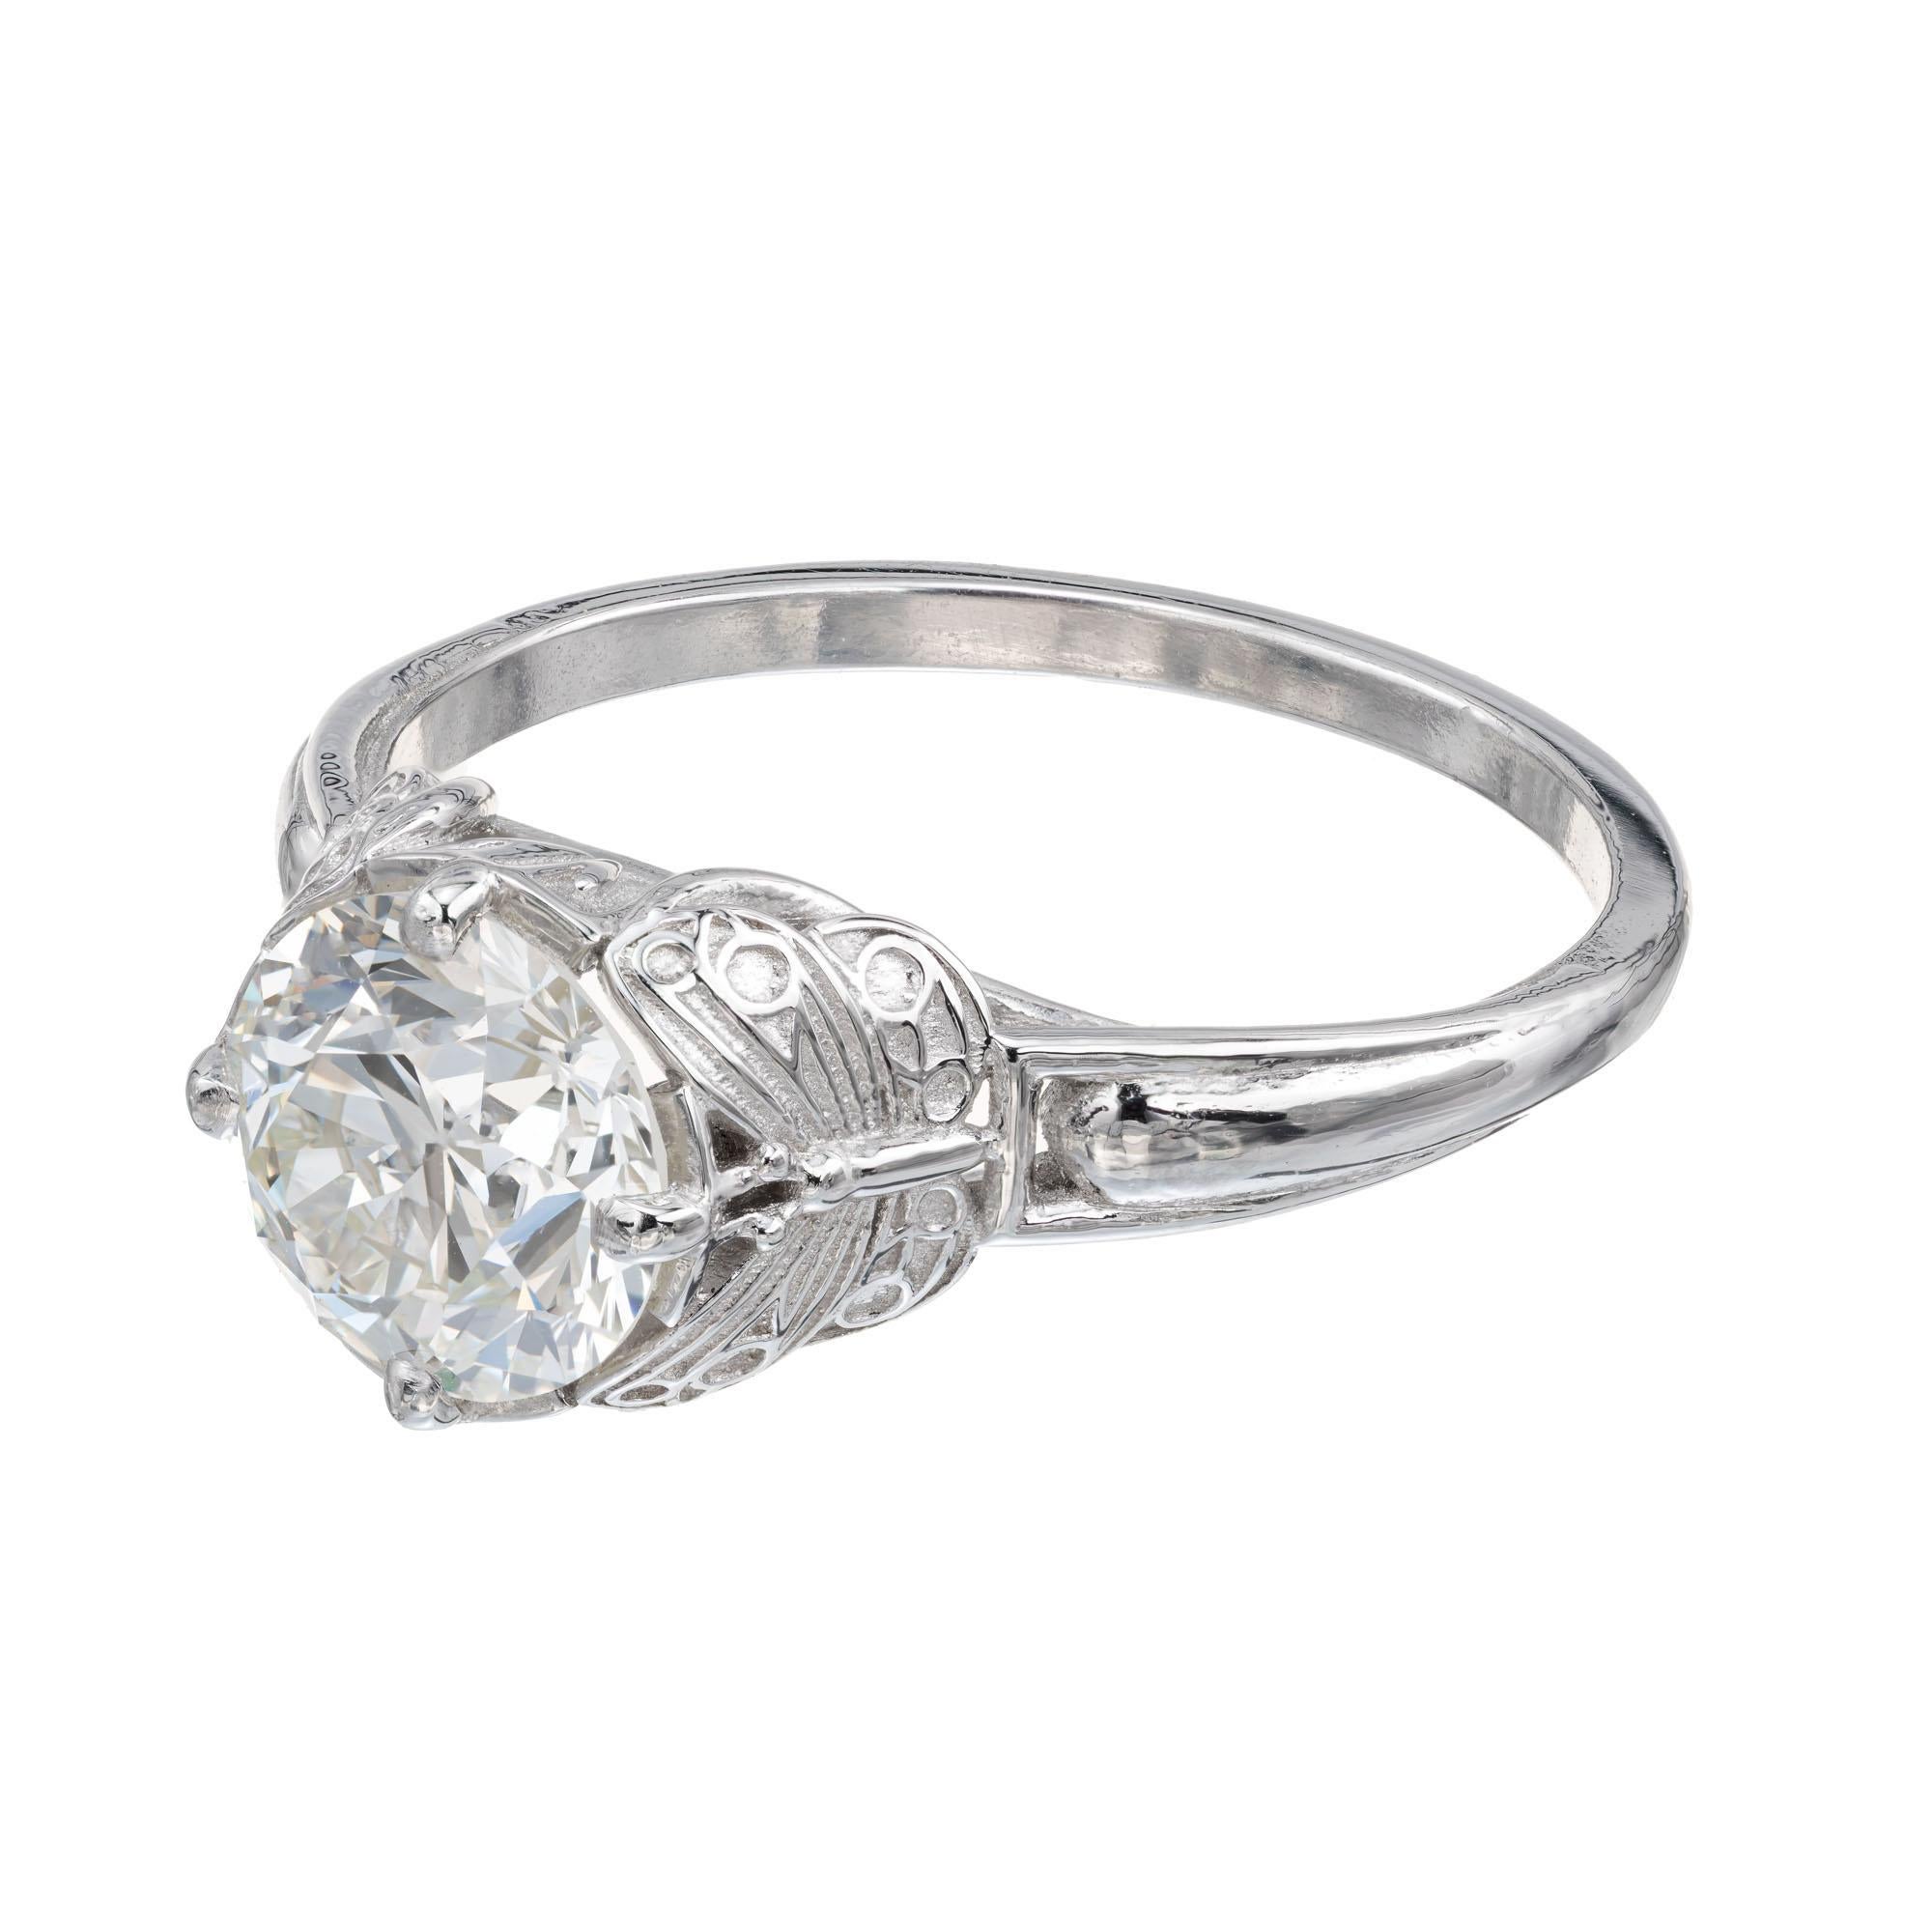 European Brilliant cut diamond engagement ring. GIA Certified certified 1.45ct center stone in a platinum butterfly style setting. The ring is designed and crafted in the Peter Suchy Workshop. 

1 European brilliant cut diamond I VS, approx. 1.45cts